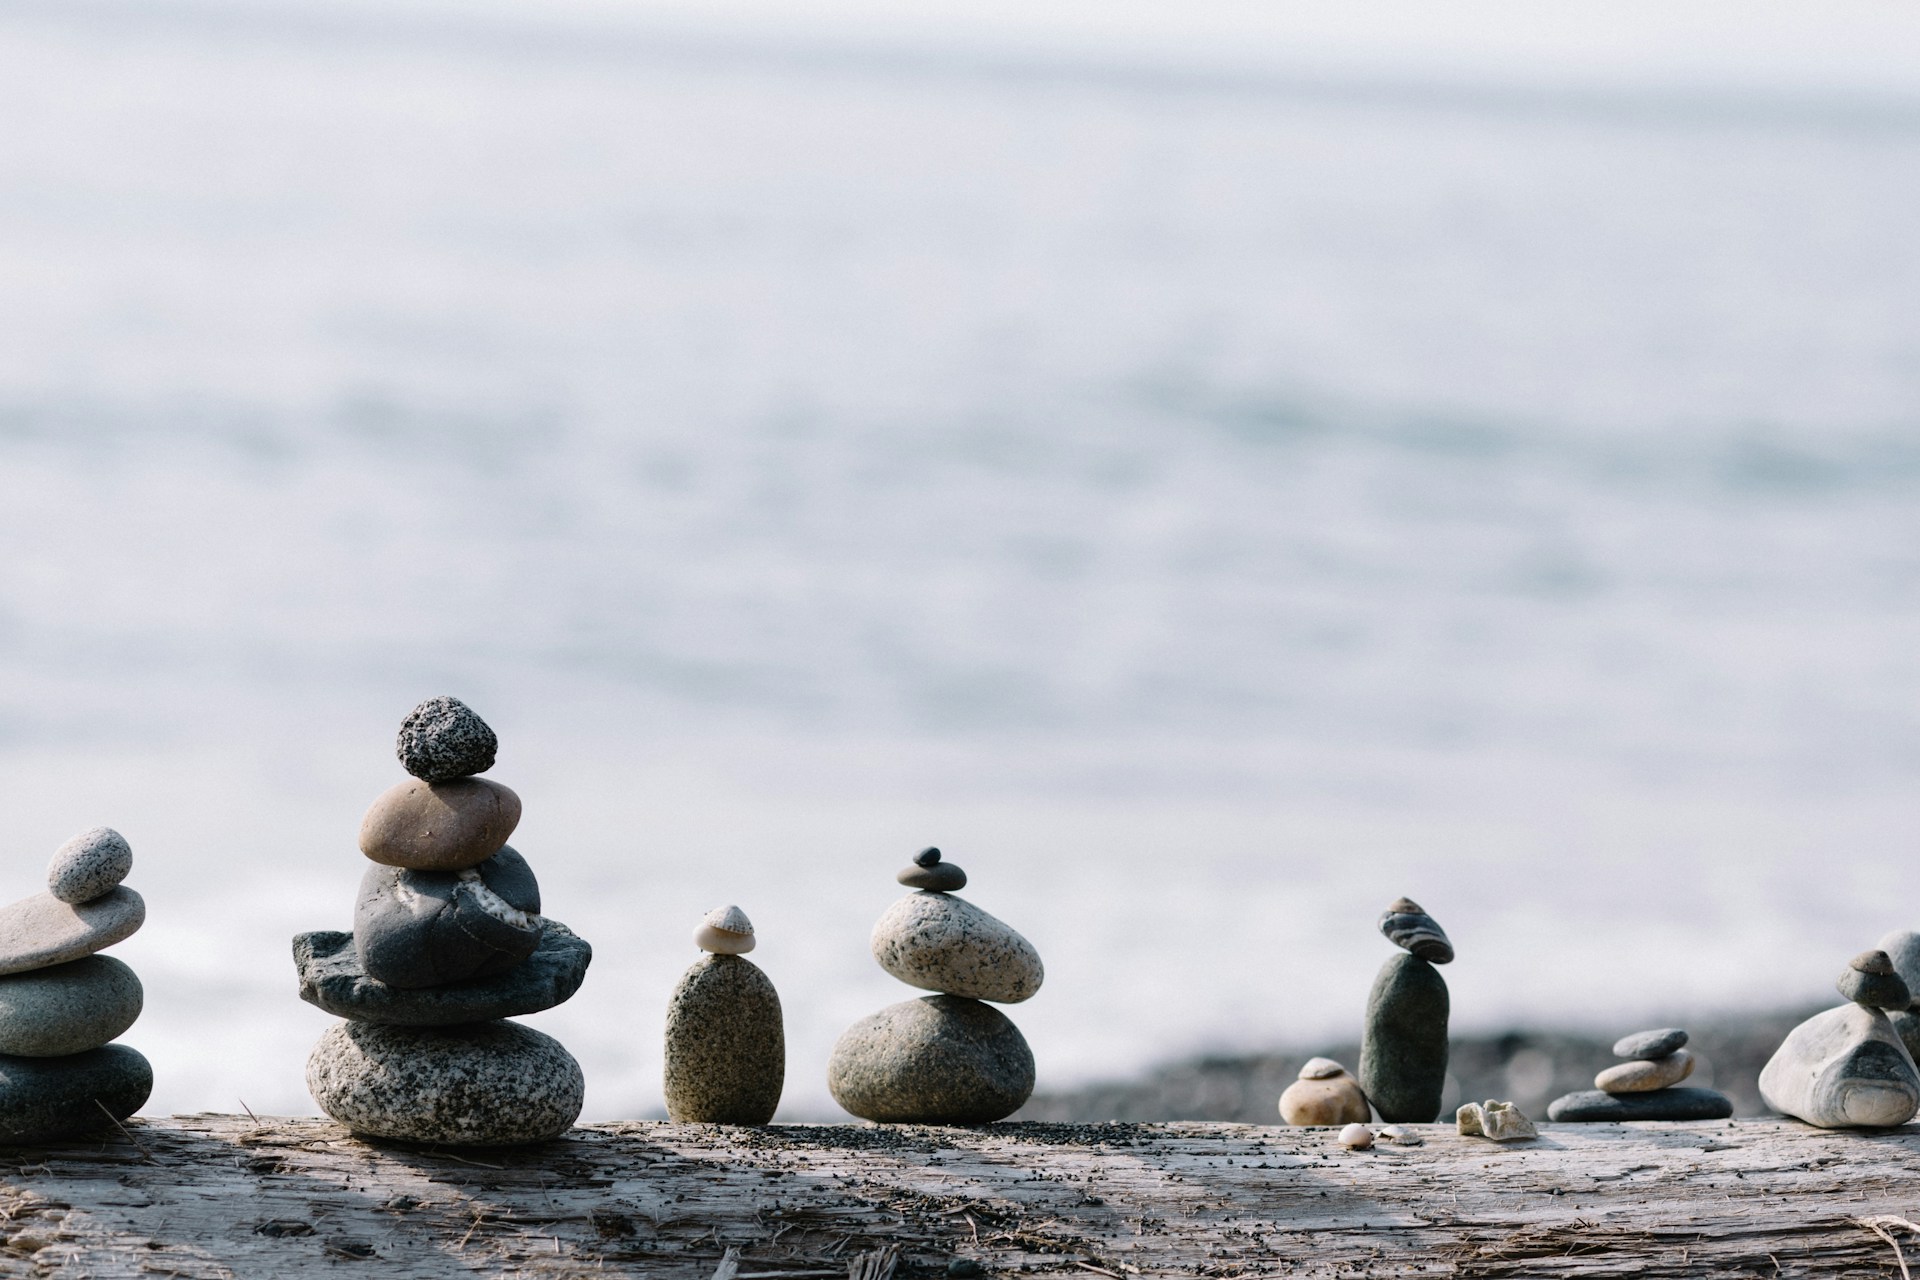 A collection of small stone stacks arranged on a driftwood log, with a blurred ocean in the background. The stacks vary in size and shape, reminiscent of the calming exercises used in trauma clinics to restore serenity and balance.